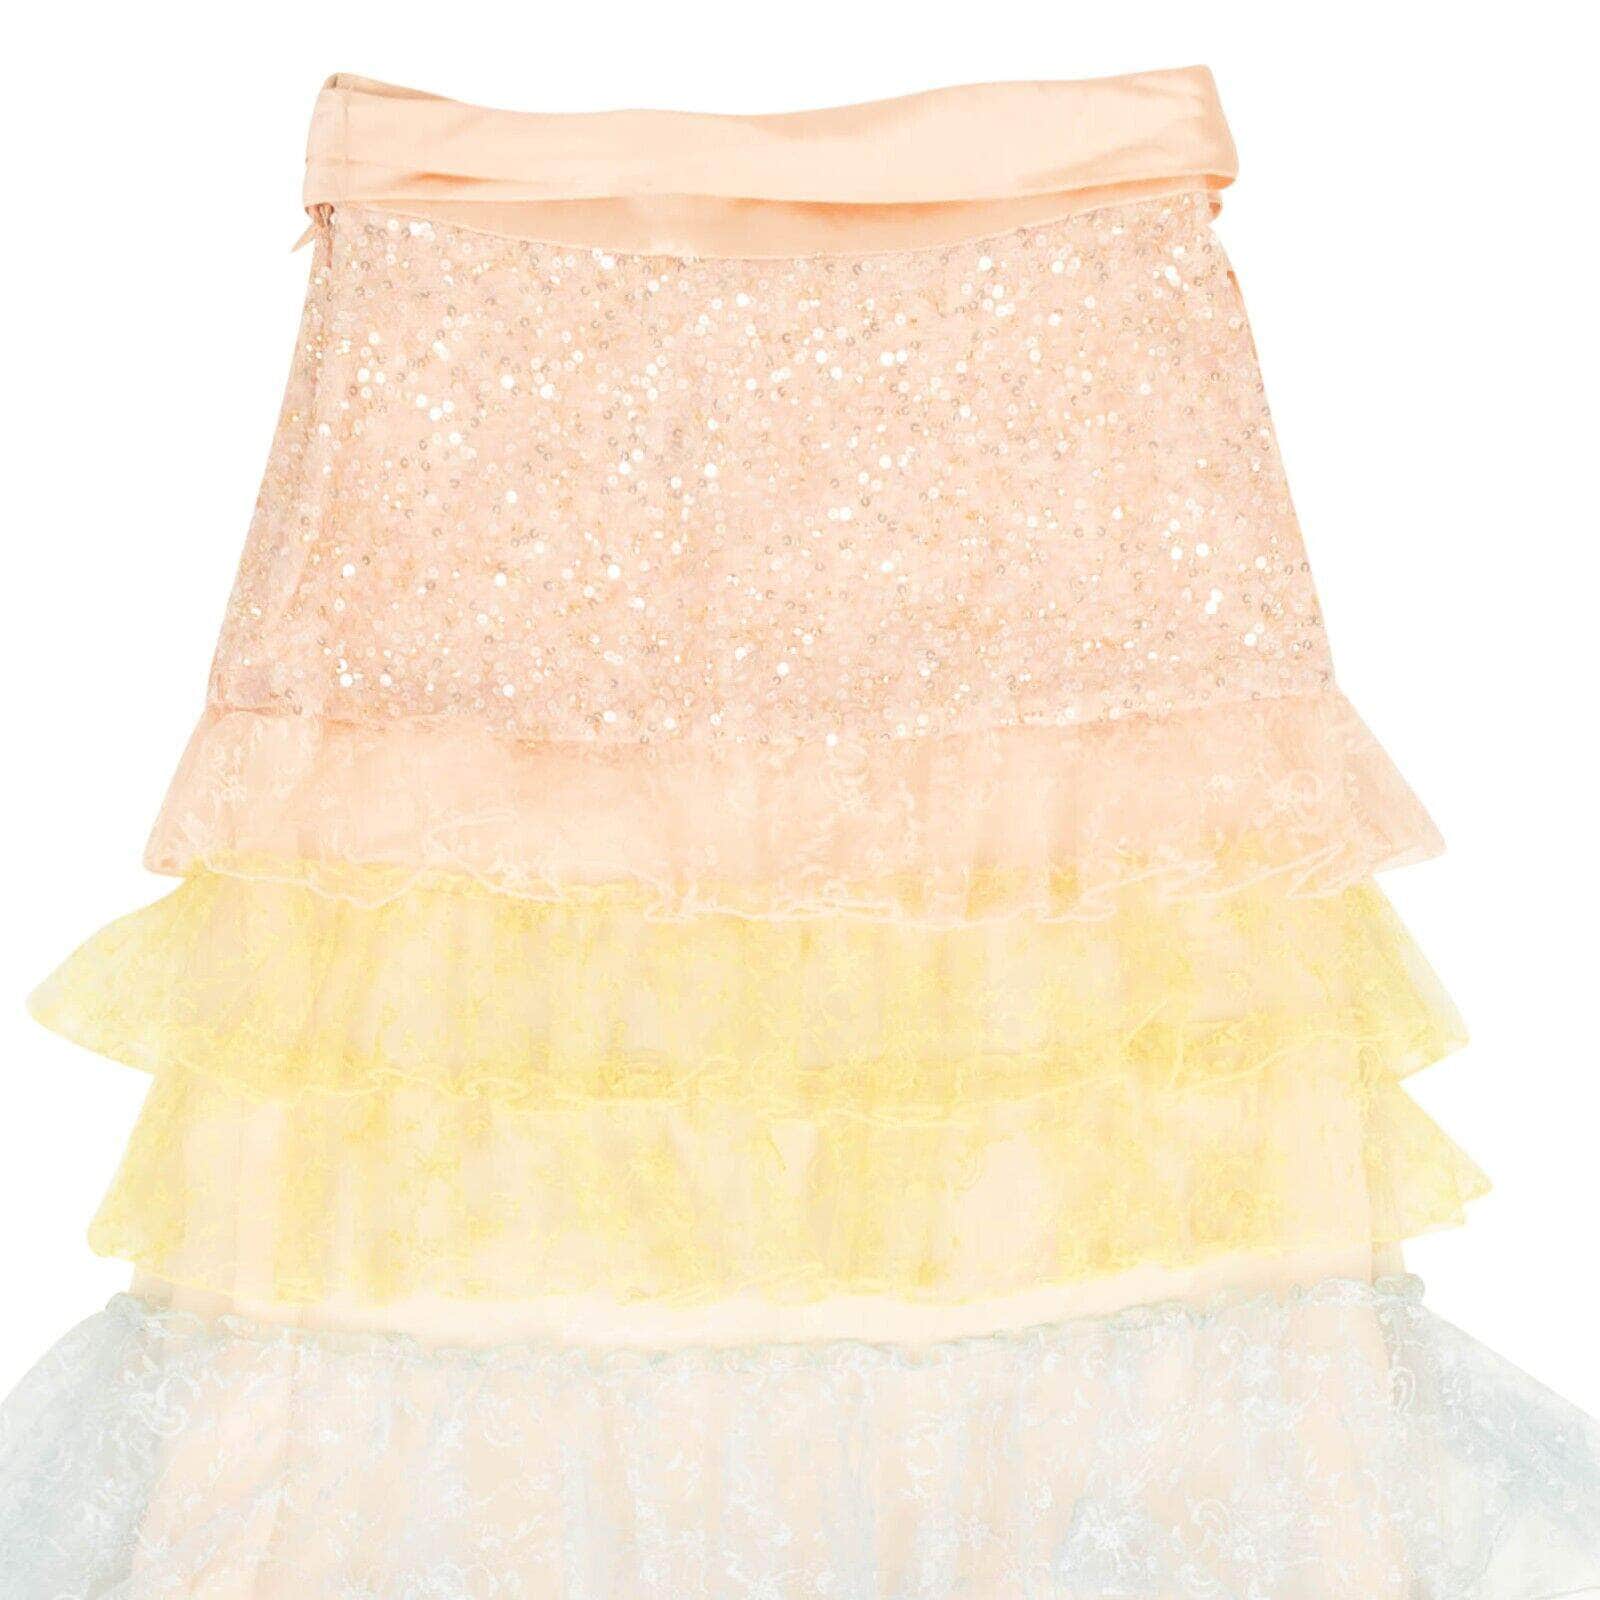 Rodarte 2000-5000, channelenable-all, chicmi, couponcollection, gender-womens, main-clothing, rodarte, size-4, womens-flared-skirts 4 Peach And Multi White Tie Skirt 95-RDT-0007/4 95-RDT-0007/4